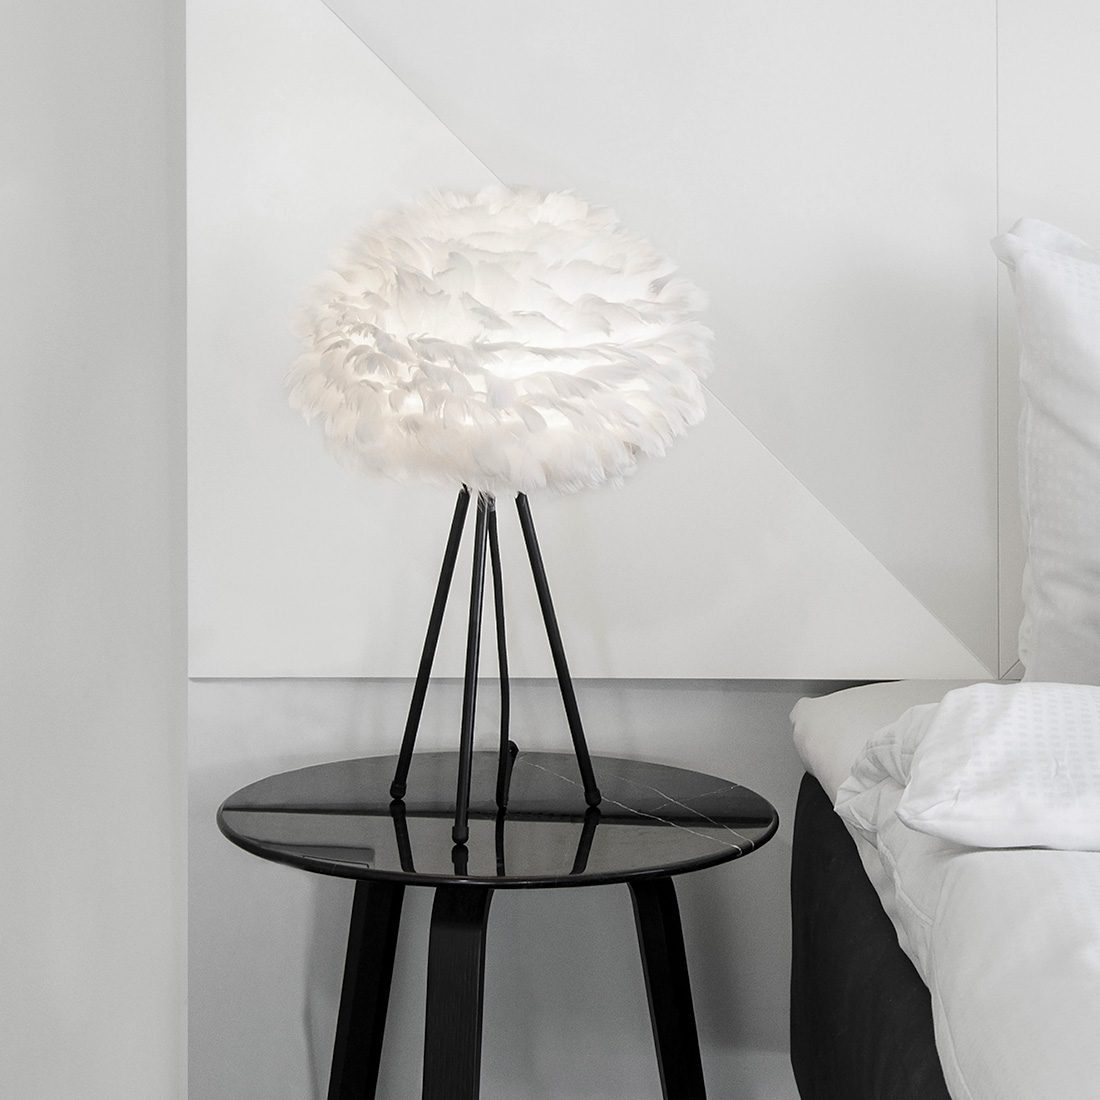 White Table Lamp Free Delivery Goabroad, Black Tripod Table Lamp With White Shade